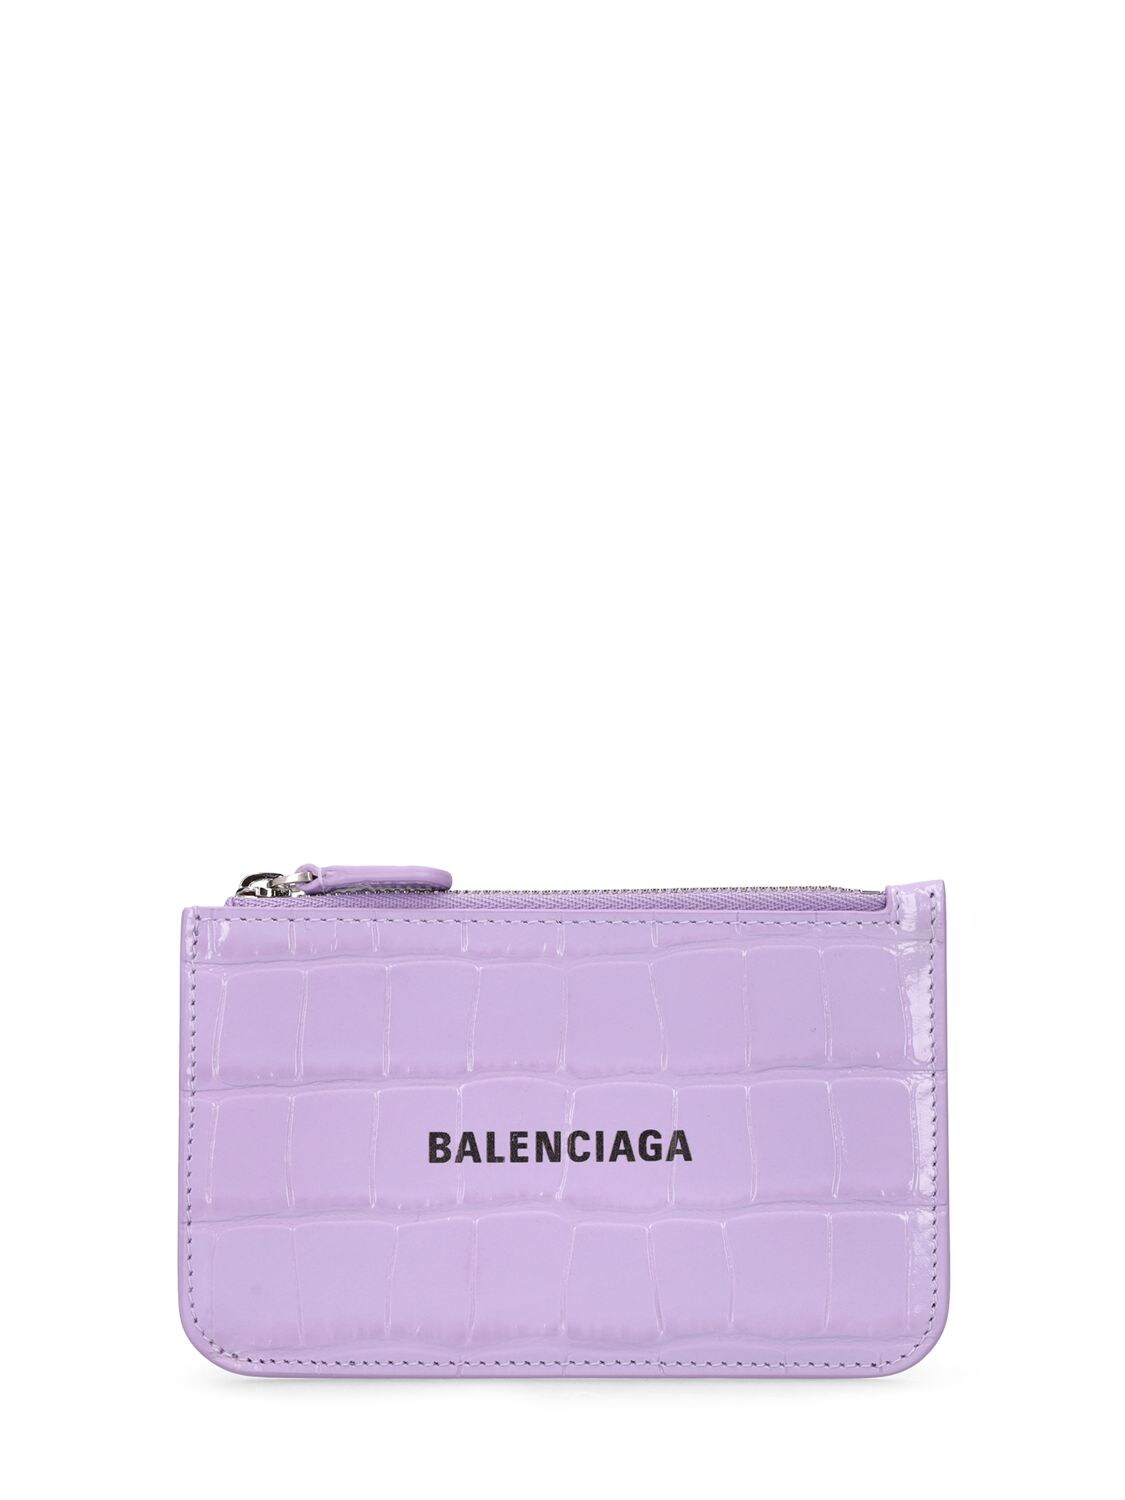 Balenciaga Embossed Leather Credit Card Holder In Lilac